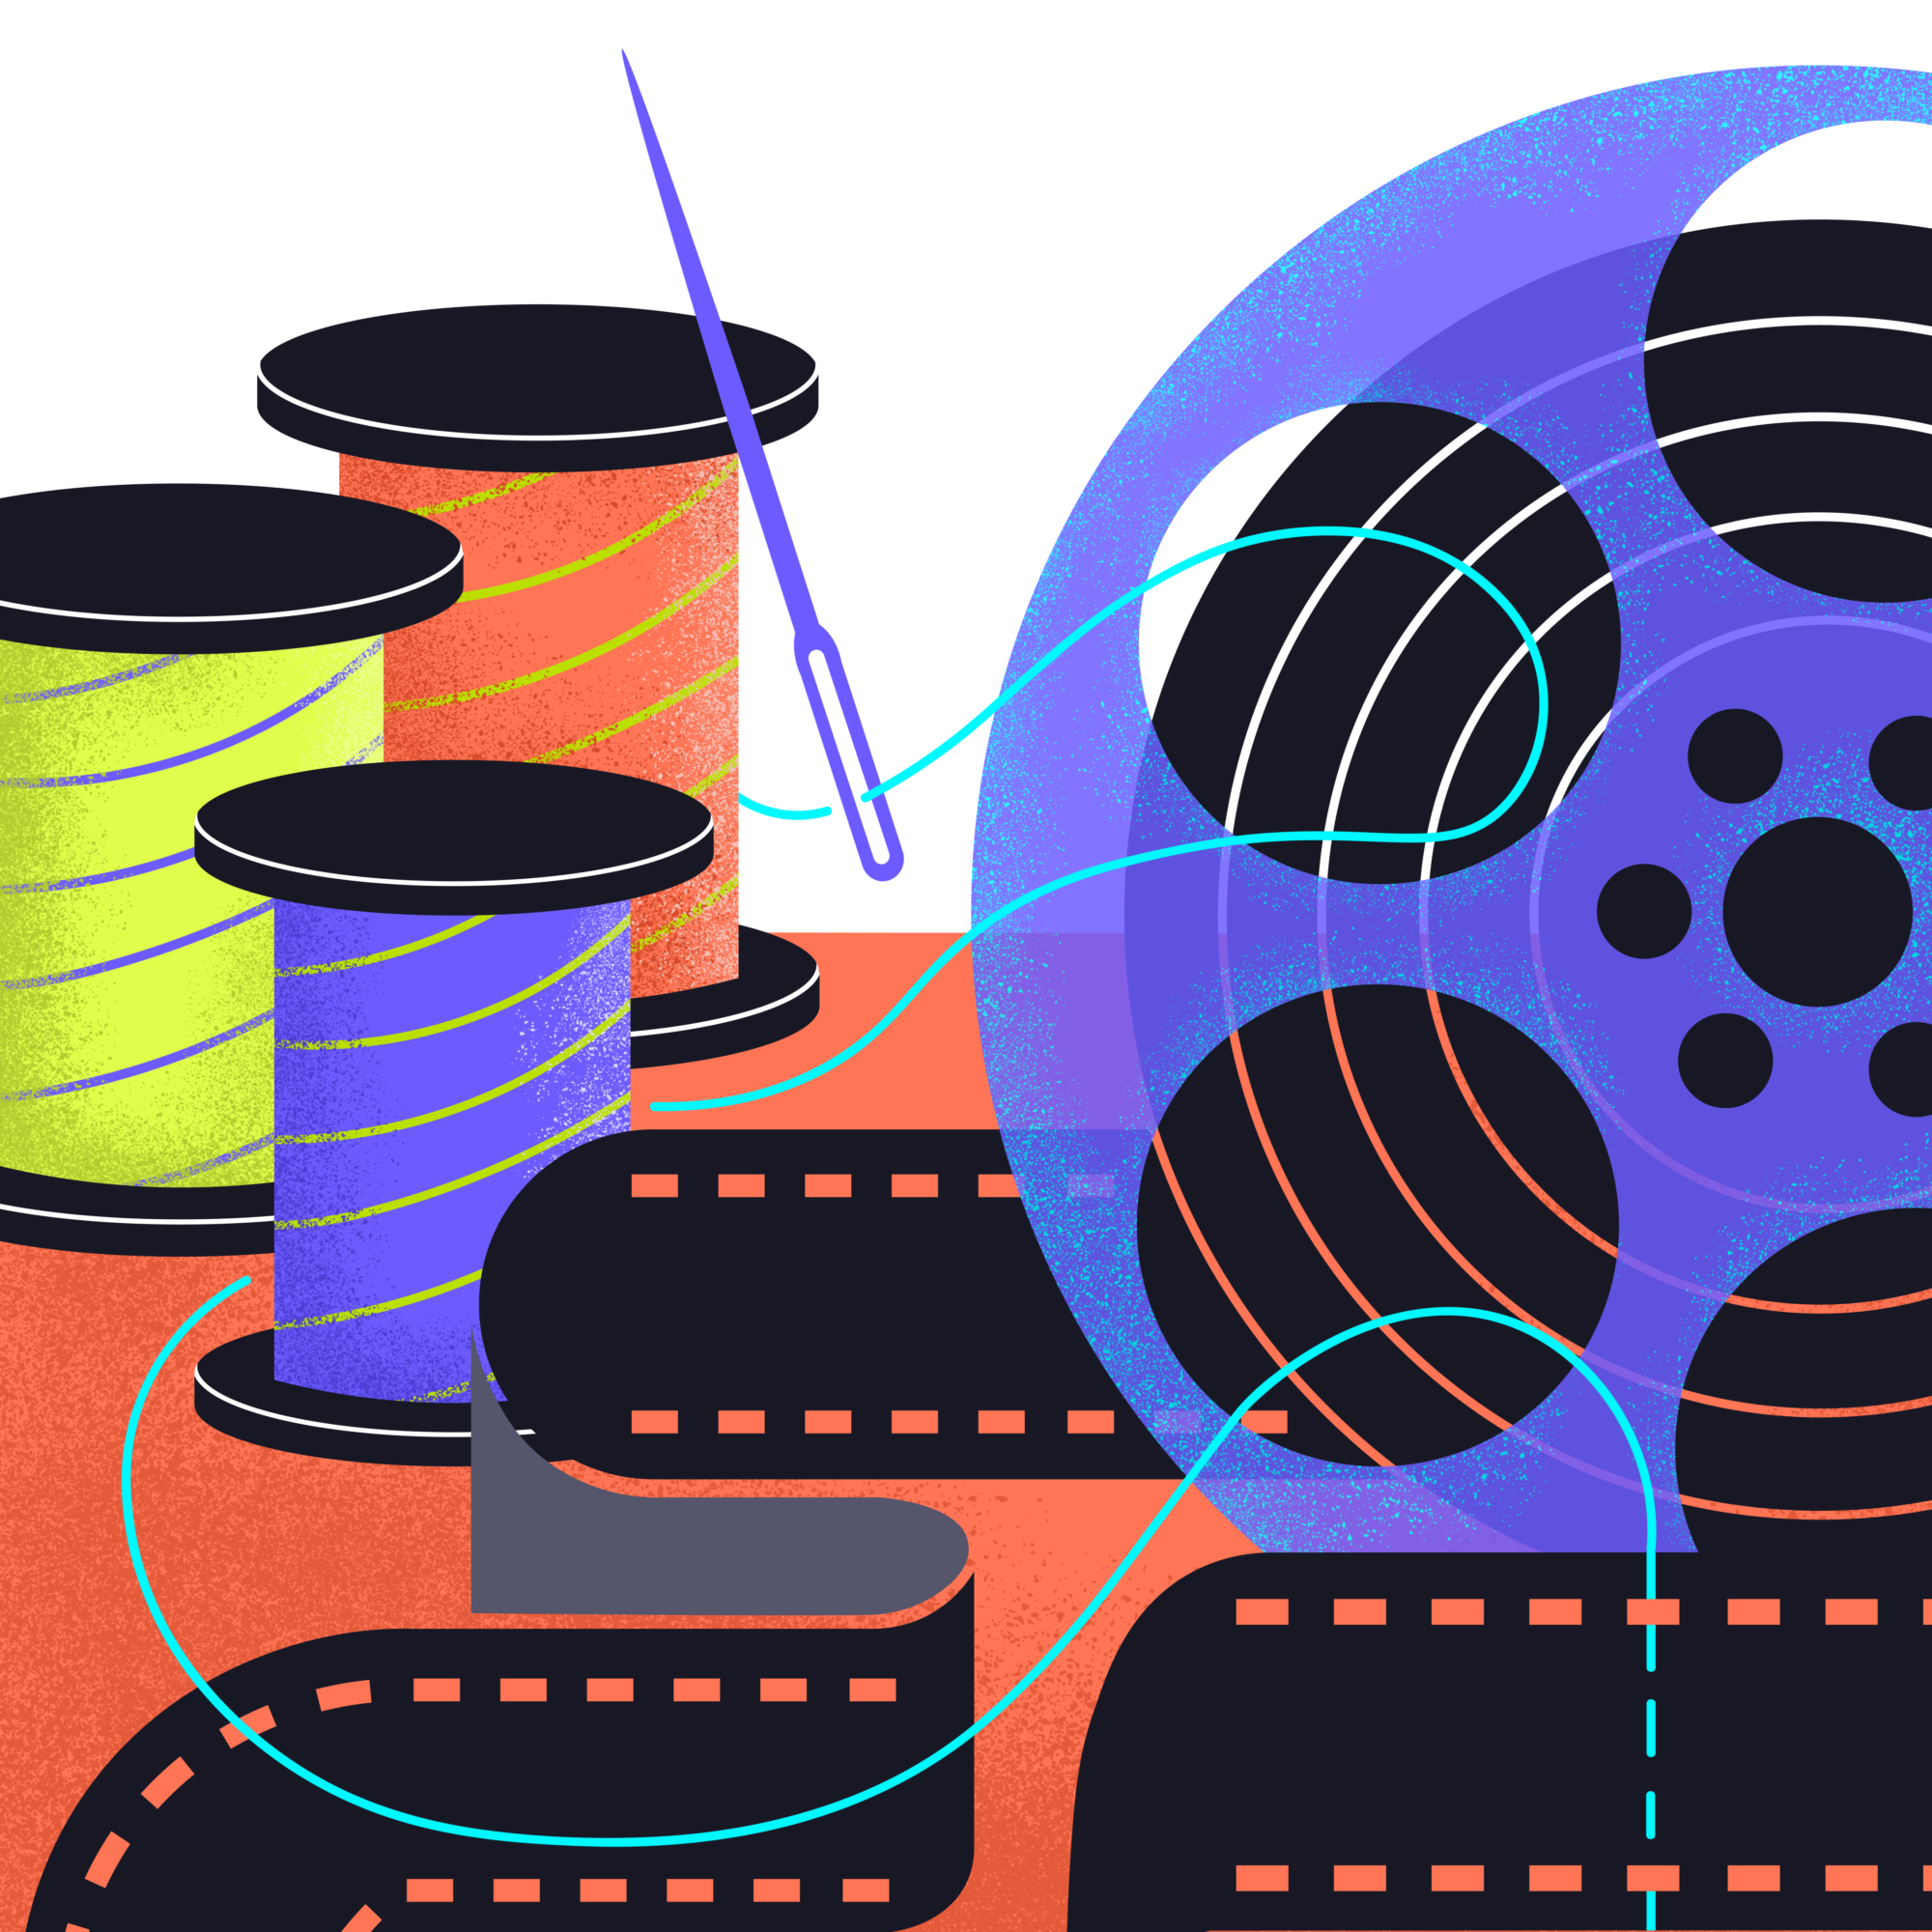 A film reel and spools of thread, illustrated